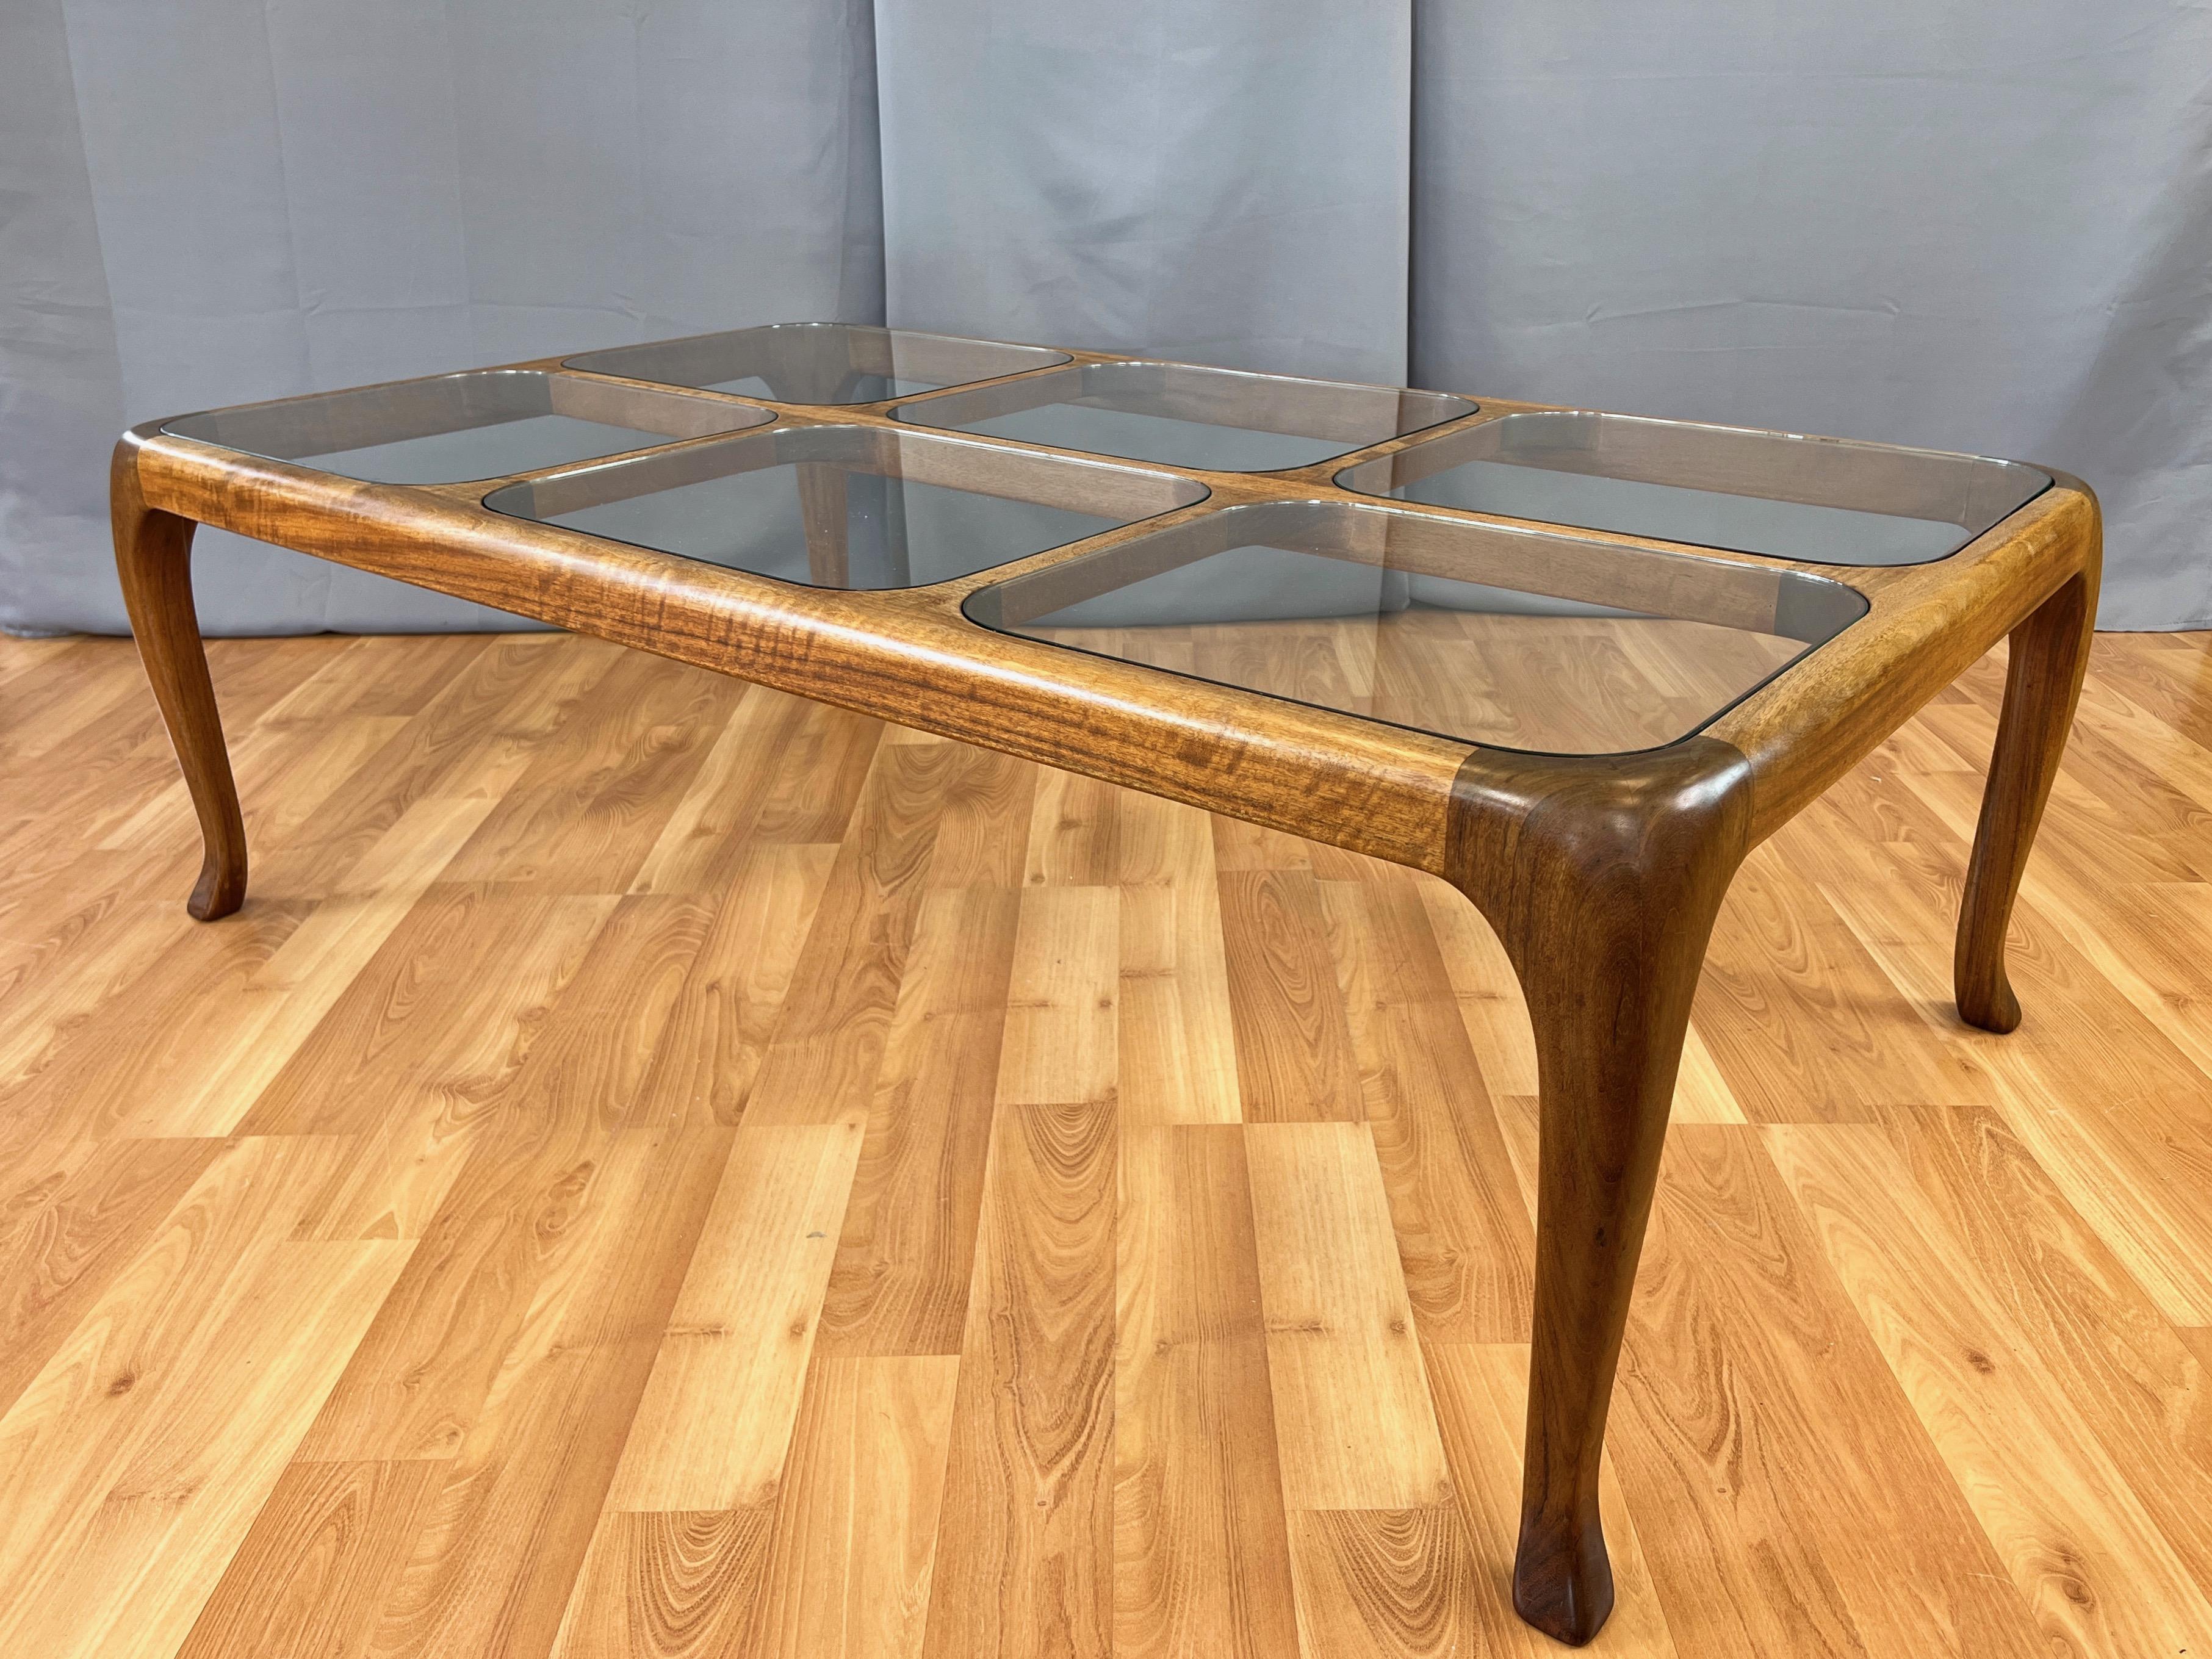 A large and very handsome 1982 walnut coffee with inset glass multi-pane top by Ashland, Oregon artist, woodworker, and furniture designer Thomas Saydah. 

Hand-sculpted solid walnut frame with gorgeous grain and graceful cabriole legs. Window-like